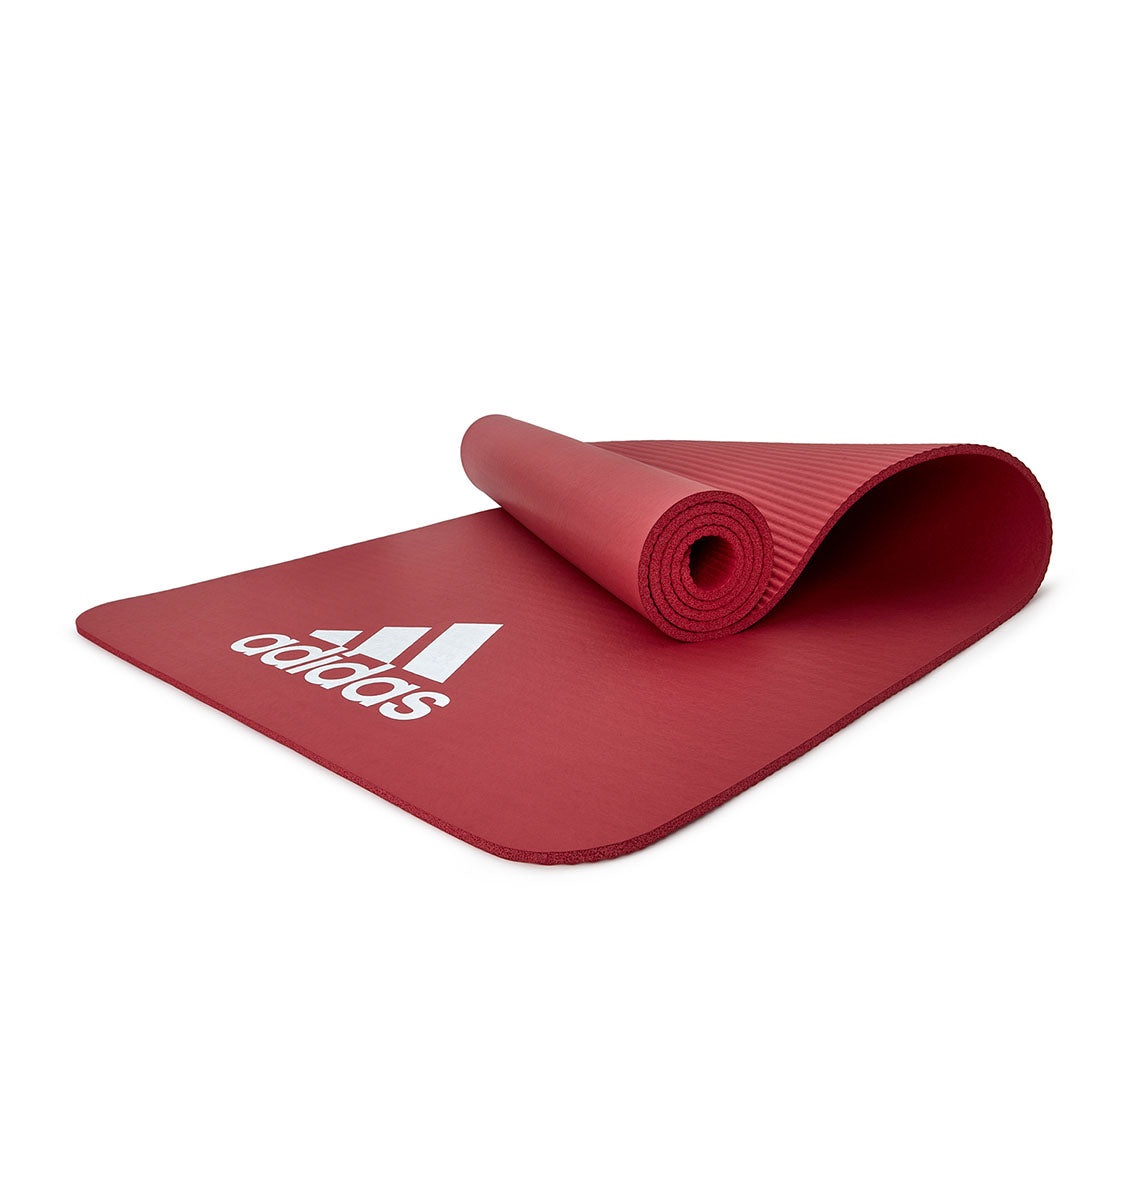 adidas Fitness Mat - 7mm - Red - 2